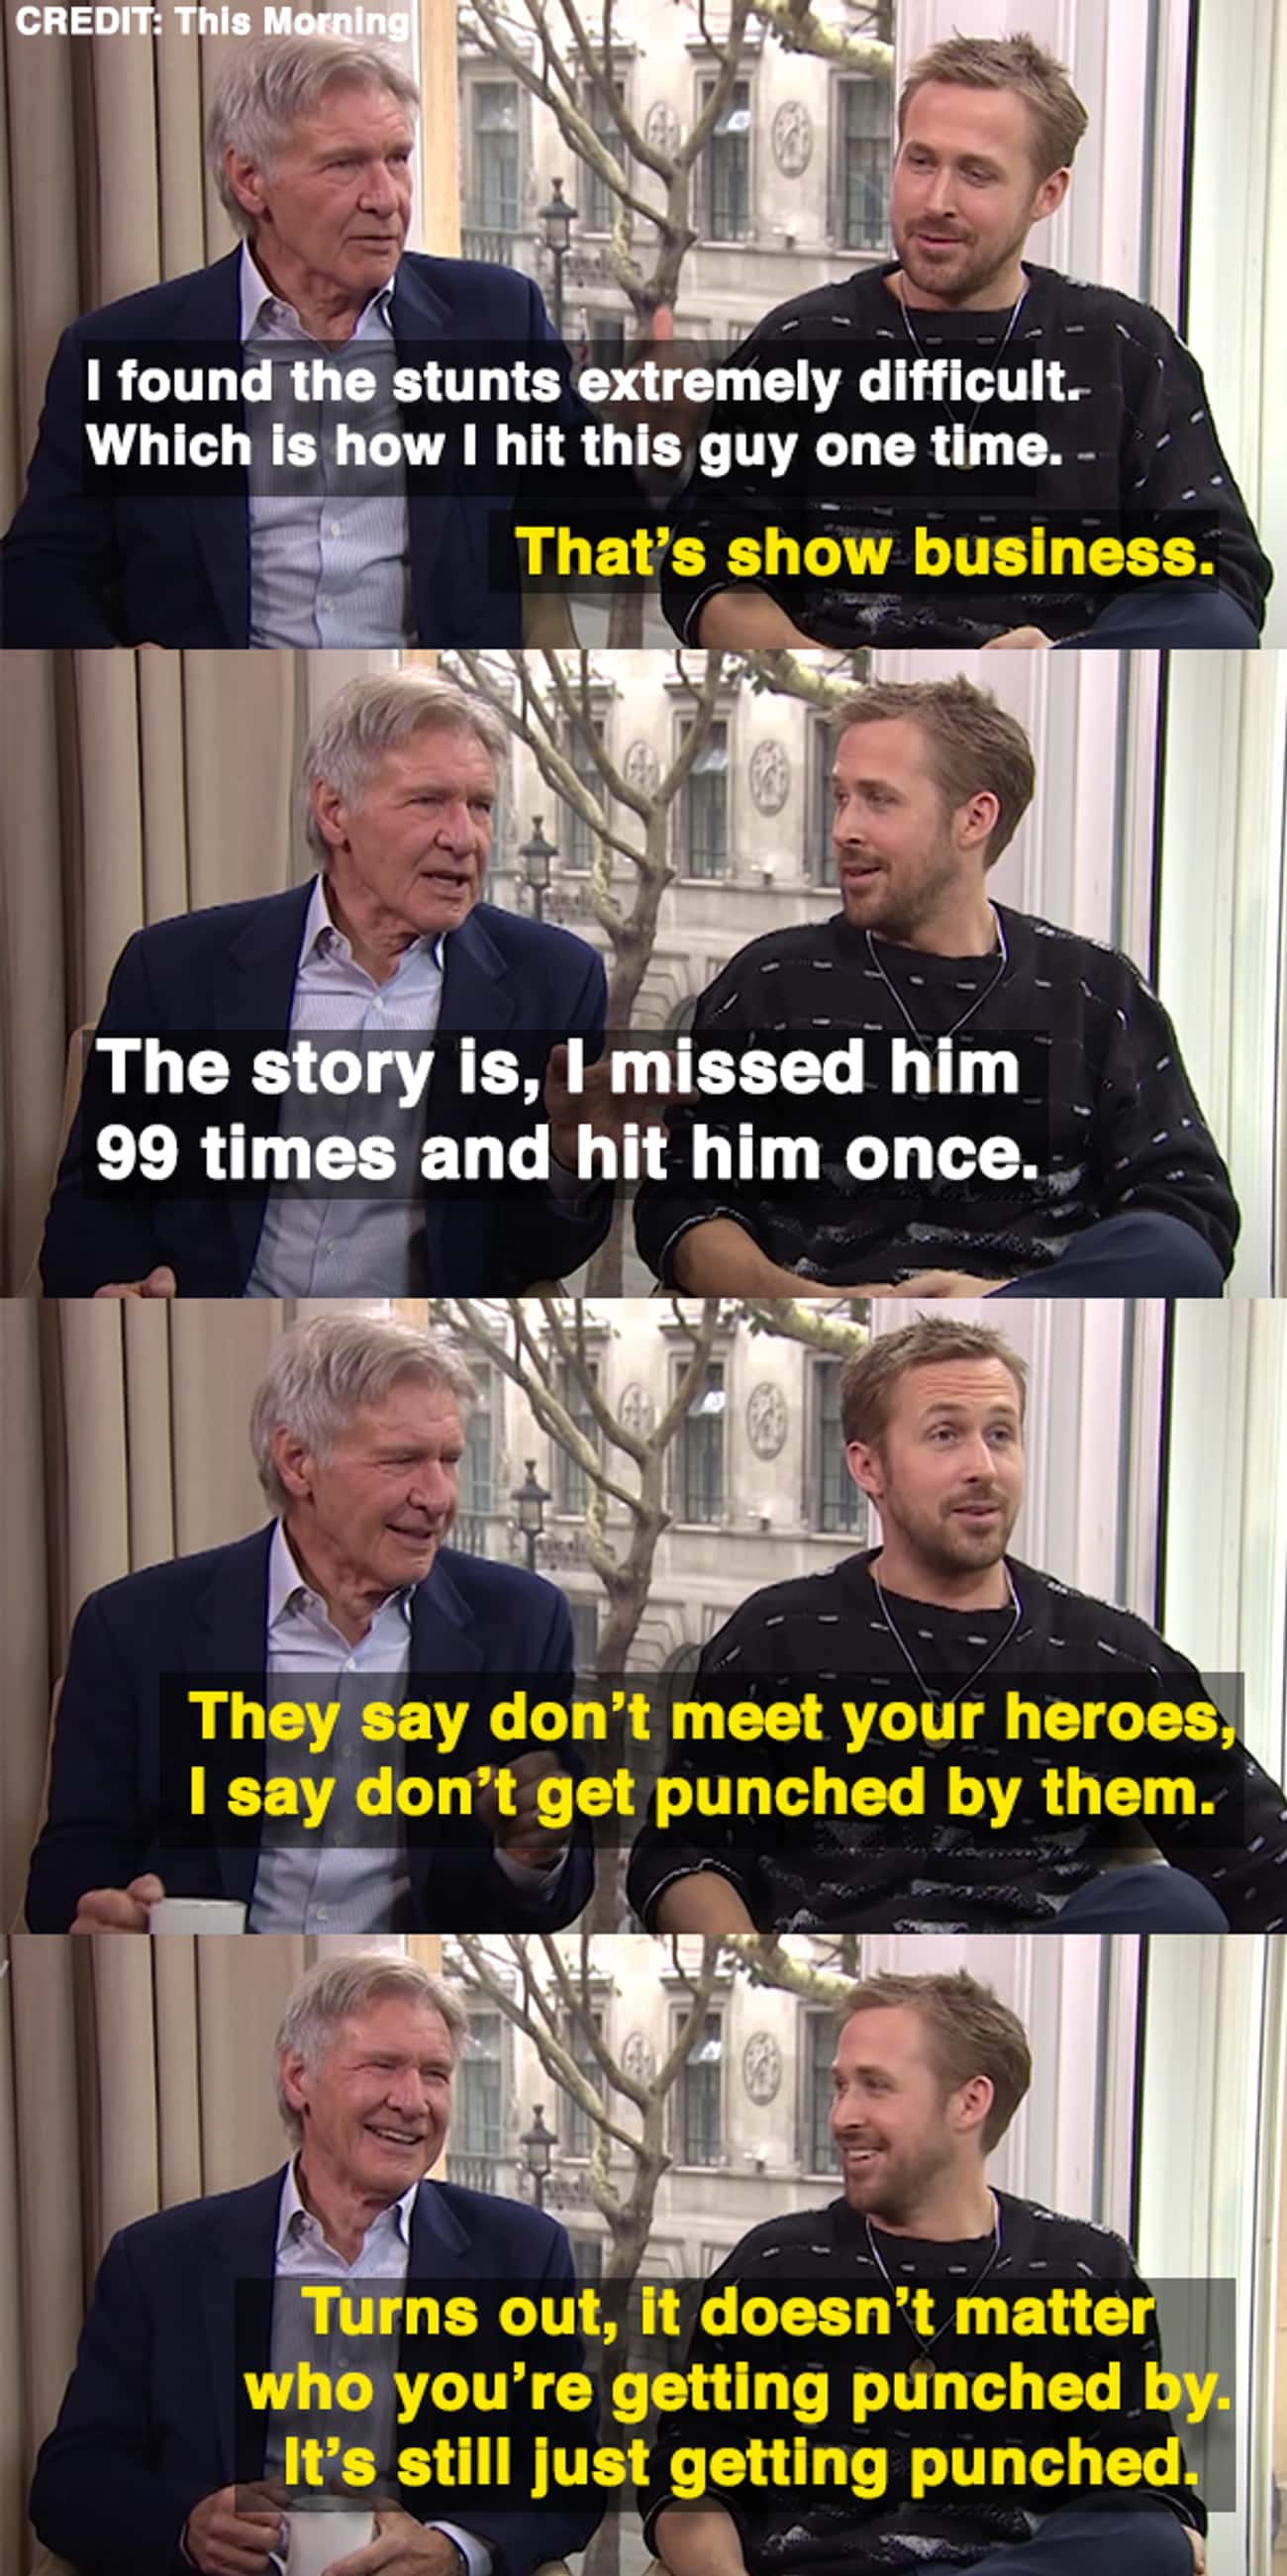 Harrison Ford Accidentally Punched Ryan Gosling While Filming 'Blade Runner 2049'